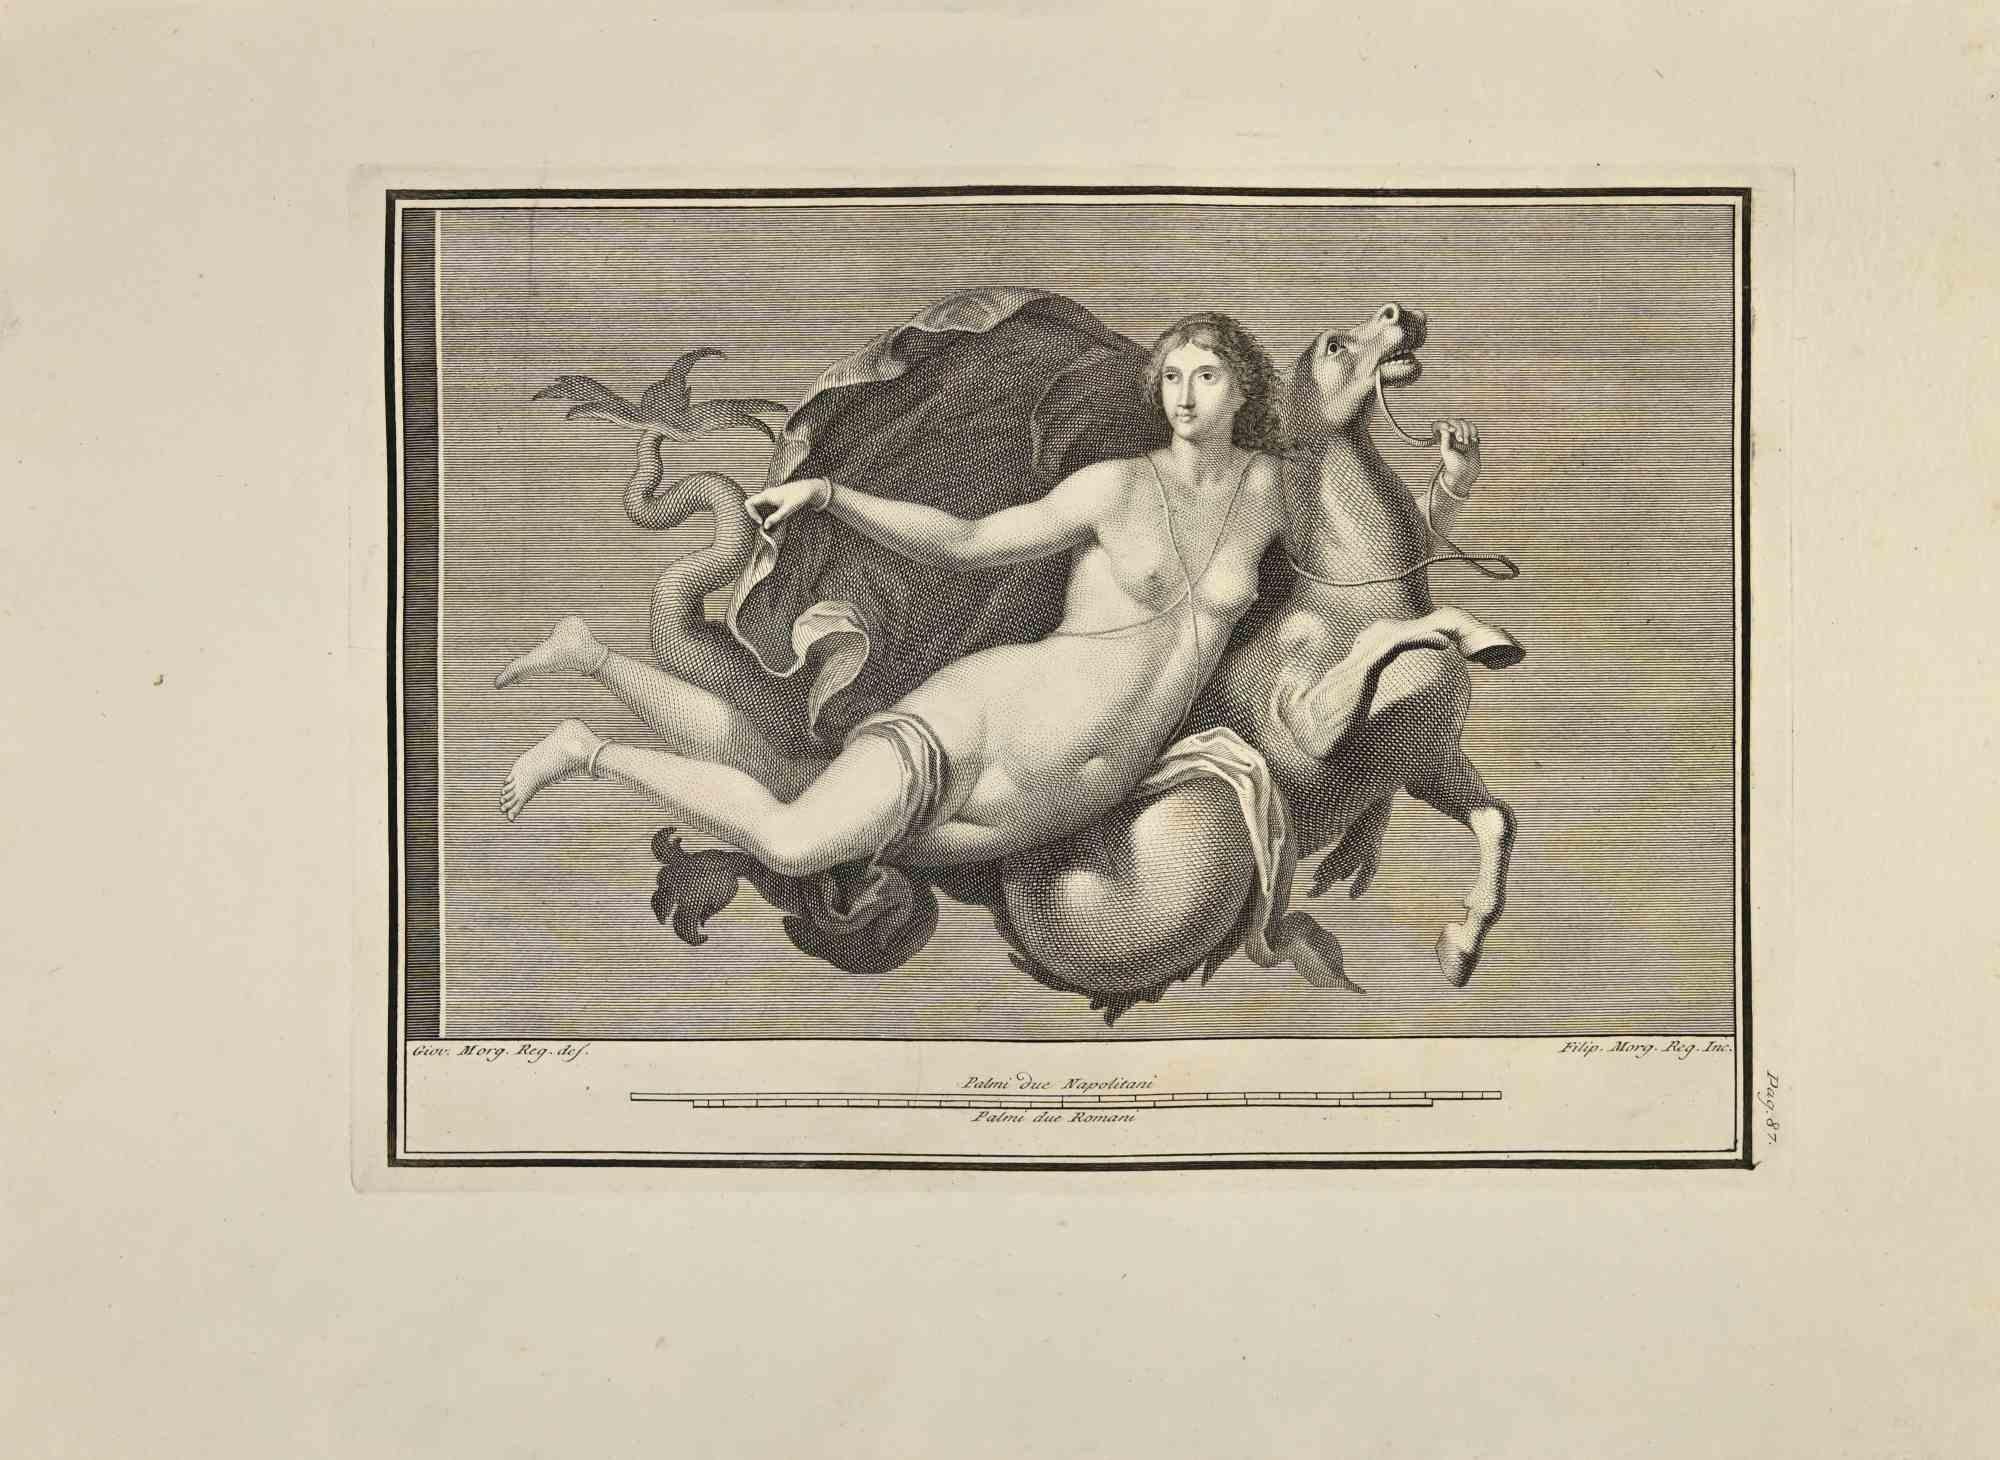 Venus Goddess With Horse from "Antiquities of Herculaneum" is an etching on paper realized by Filippo Morghen in the 18th Century.

Signed on the plate.

Good conditions with some folding.

The etching belongs to the print suite “Antiquities of